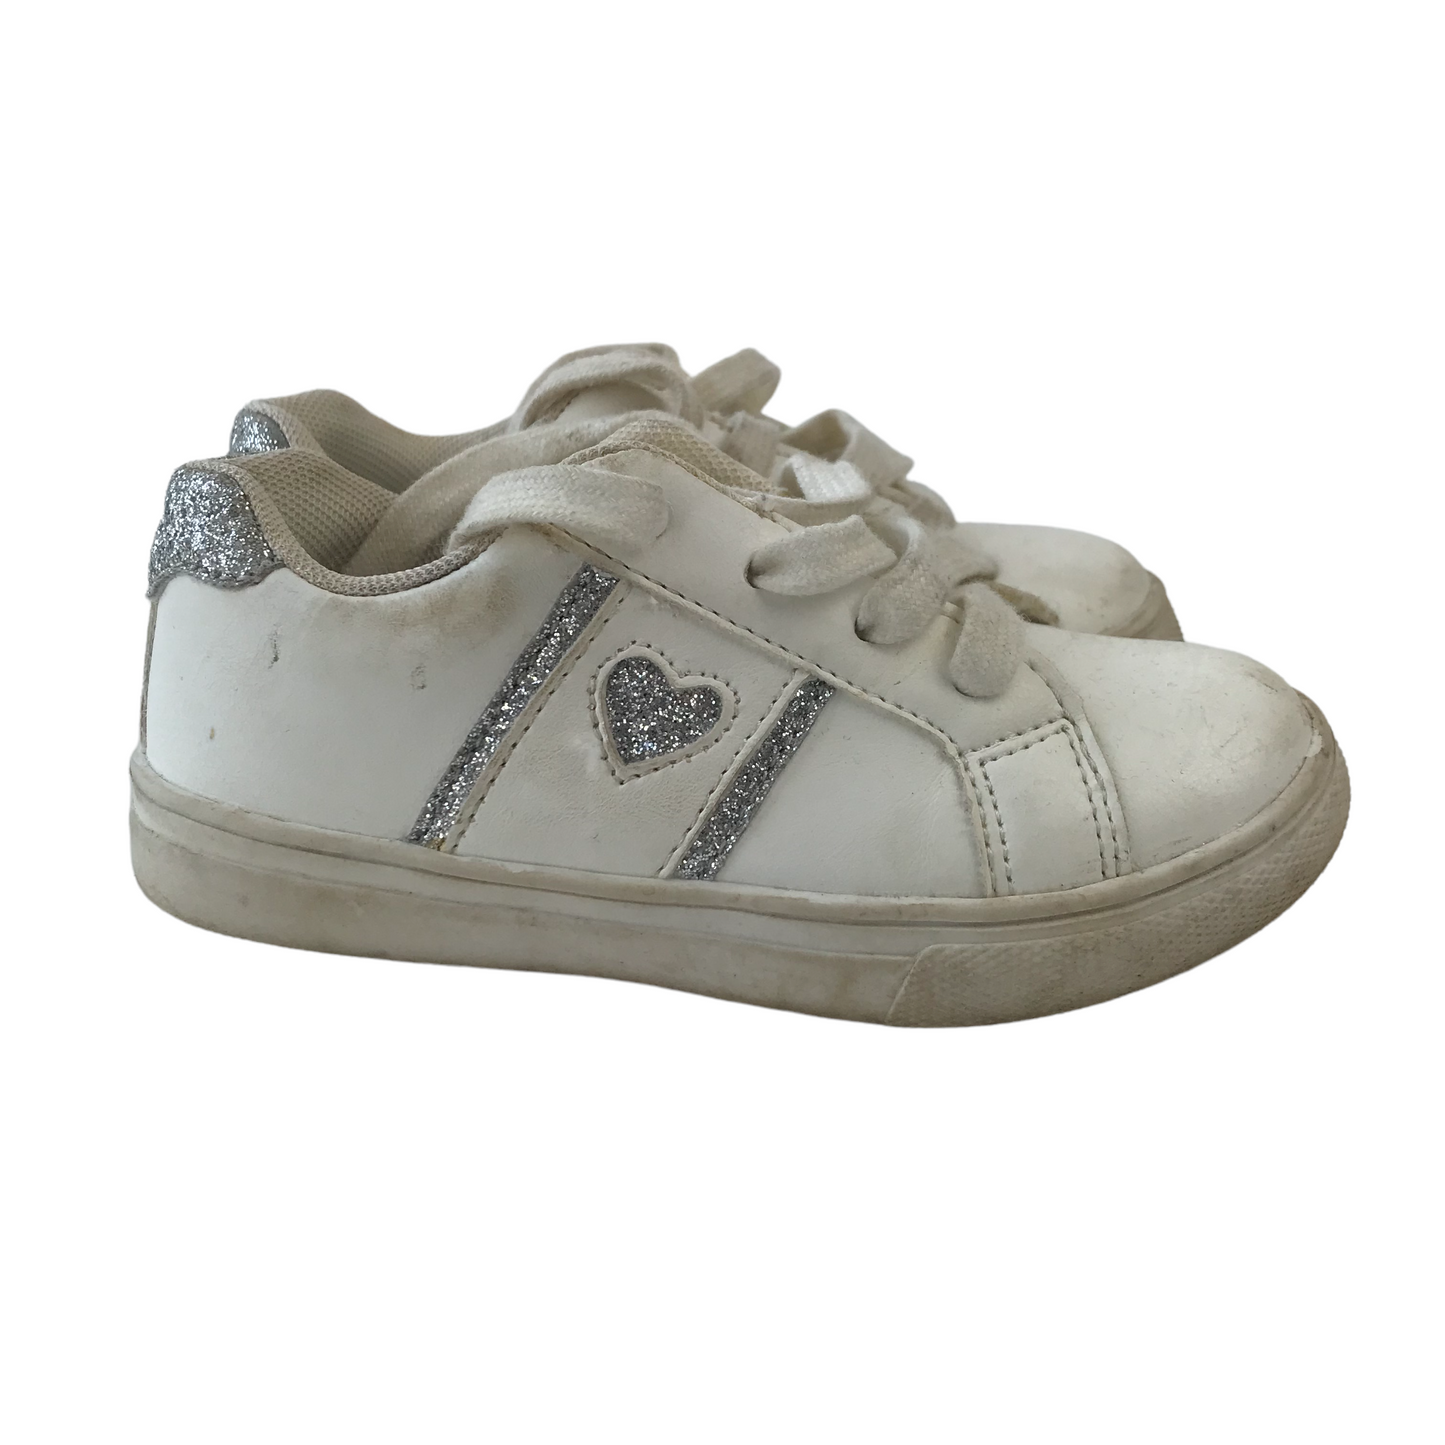 Primark White Trainers with Love Heart Detail Shoe Size 8 (jr)